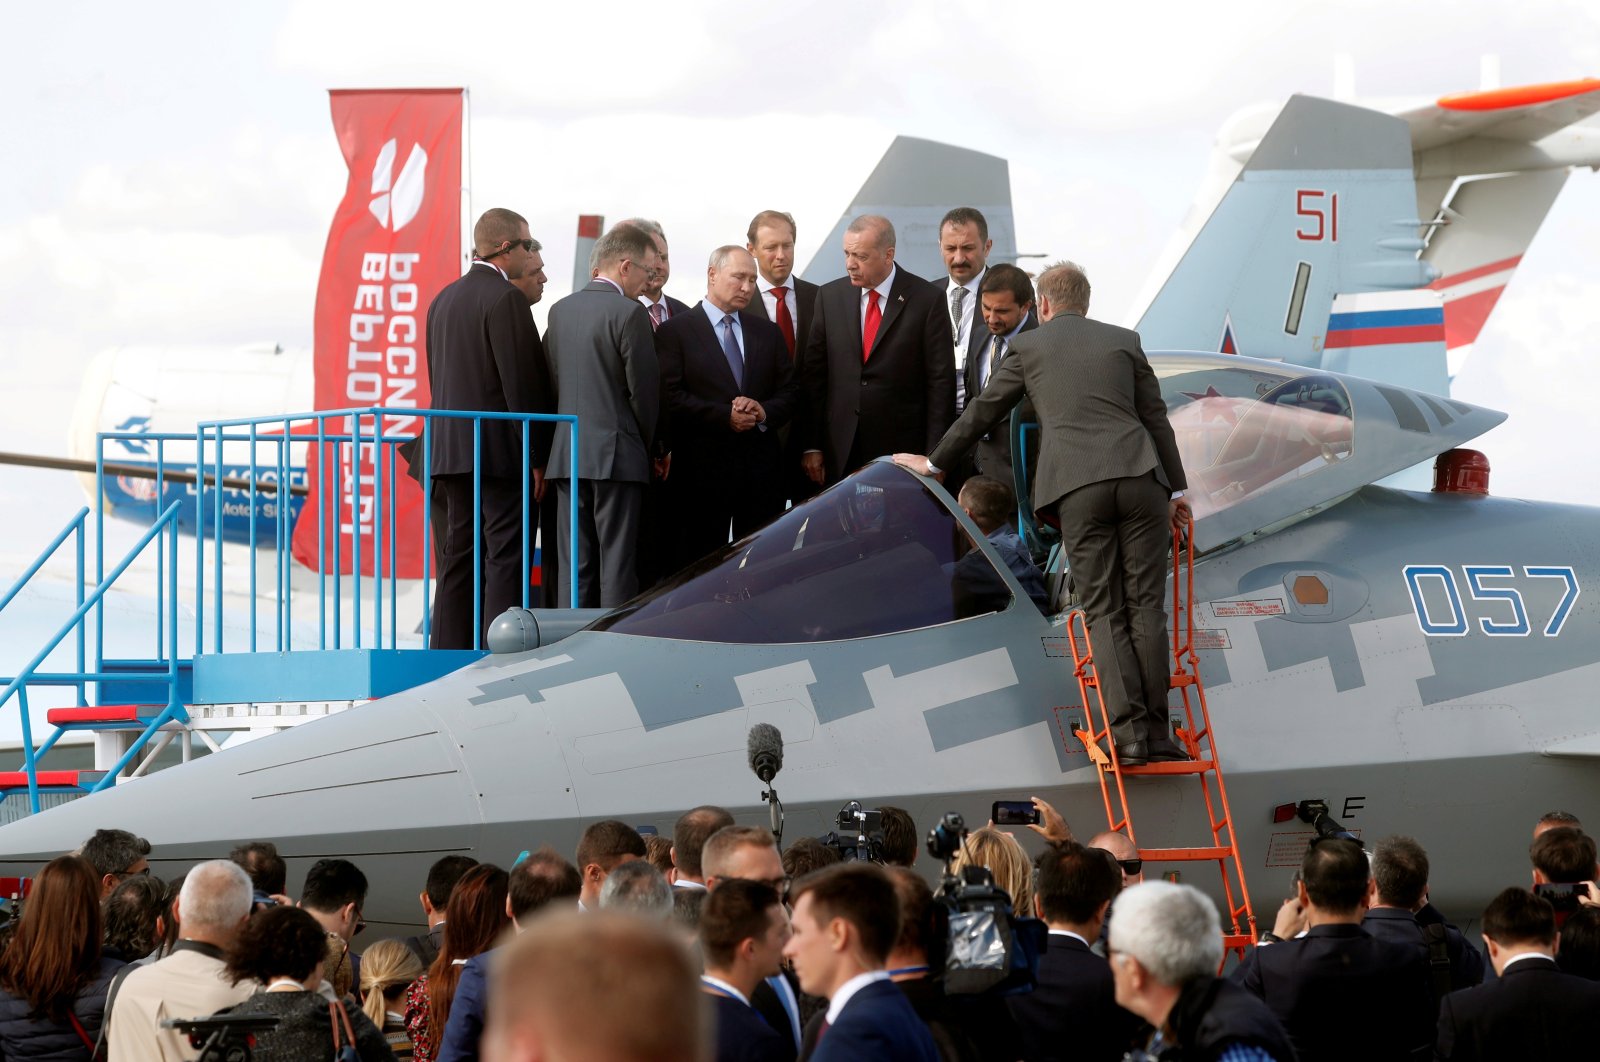 Russian President Vladimir Putin and President Recep Tayyip Erdoğan inspect a Sukhoi Su-57 fifth-generation fighter during the MAKS-2019 International Aviation and Space Salon in Zhukovsky outside Moscow, Russia, Aug. 27, 2019. (Reuters Photo)